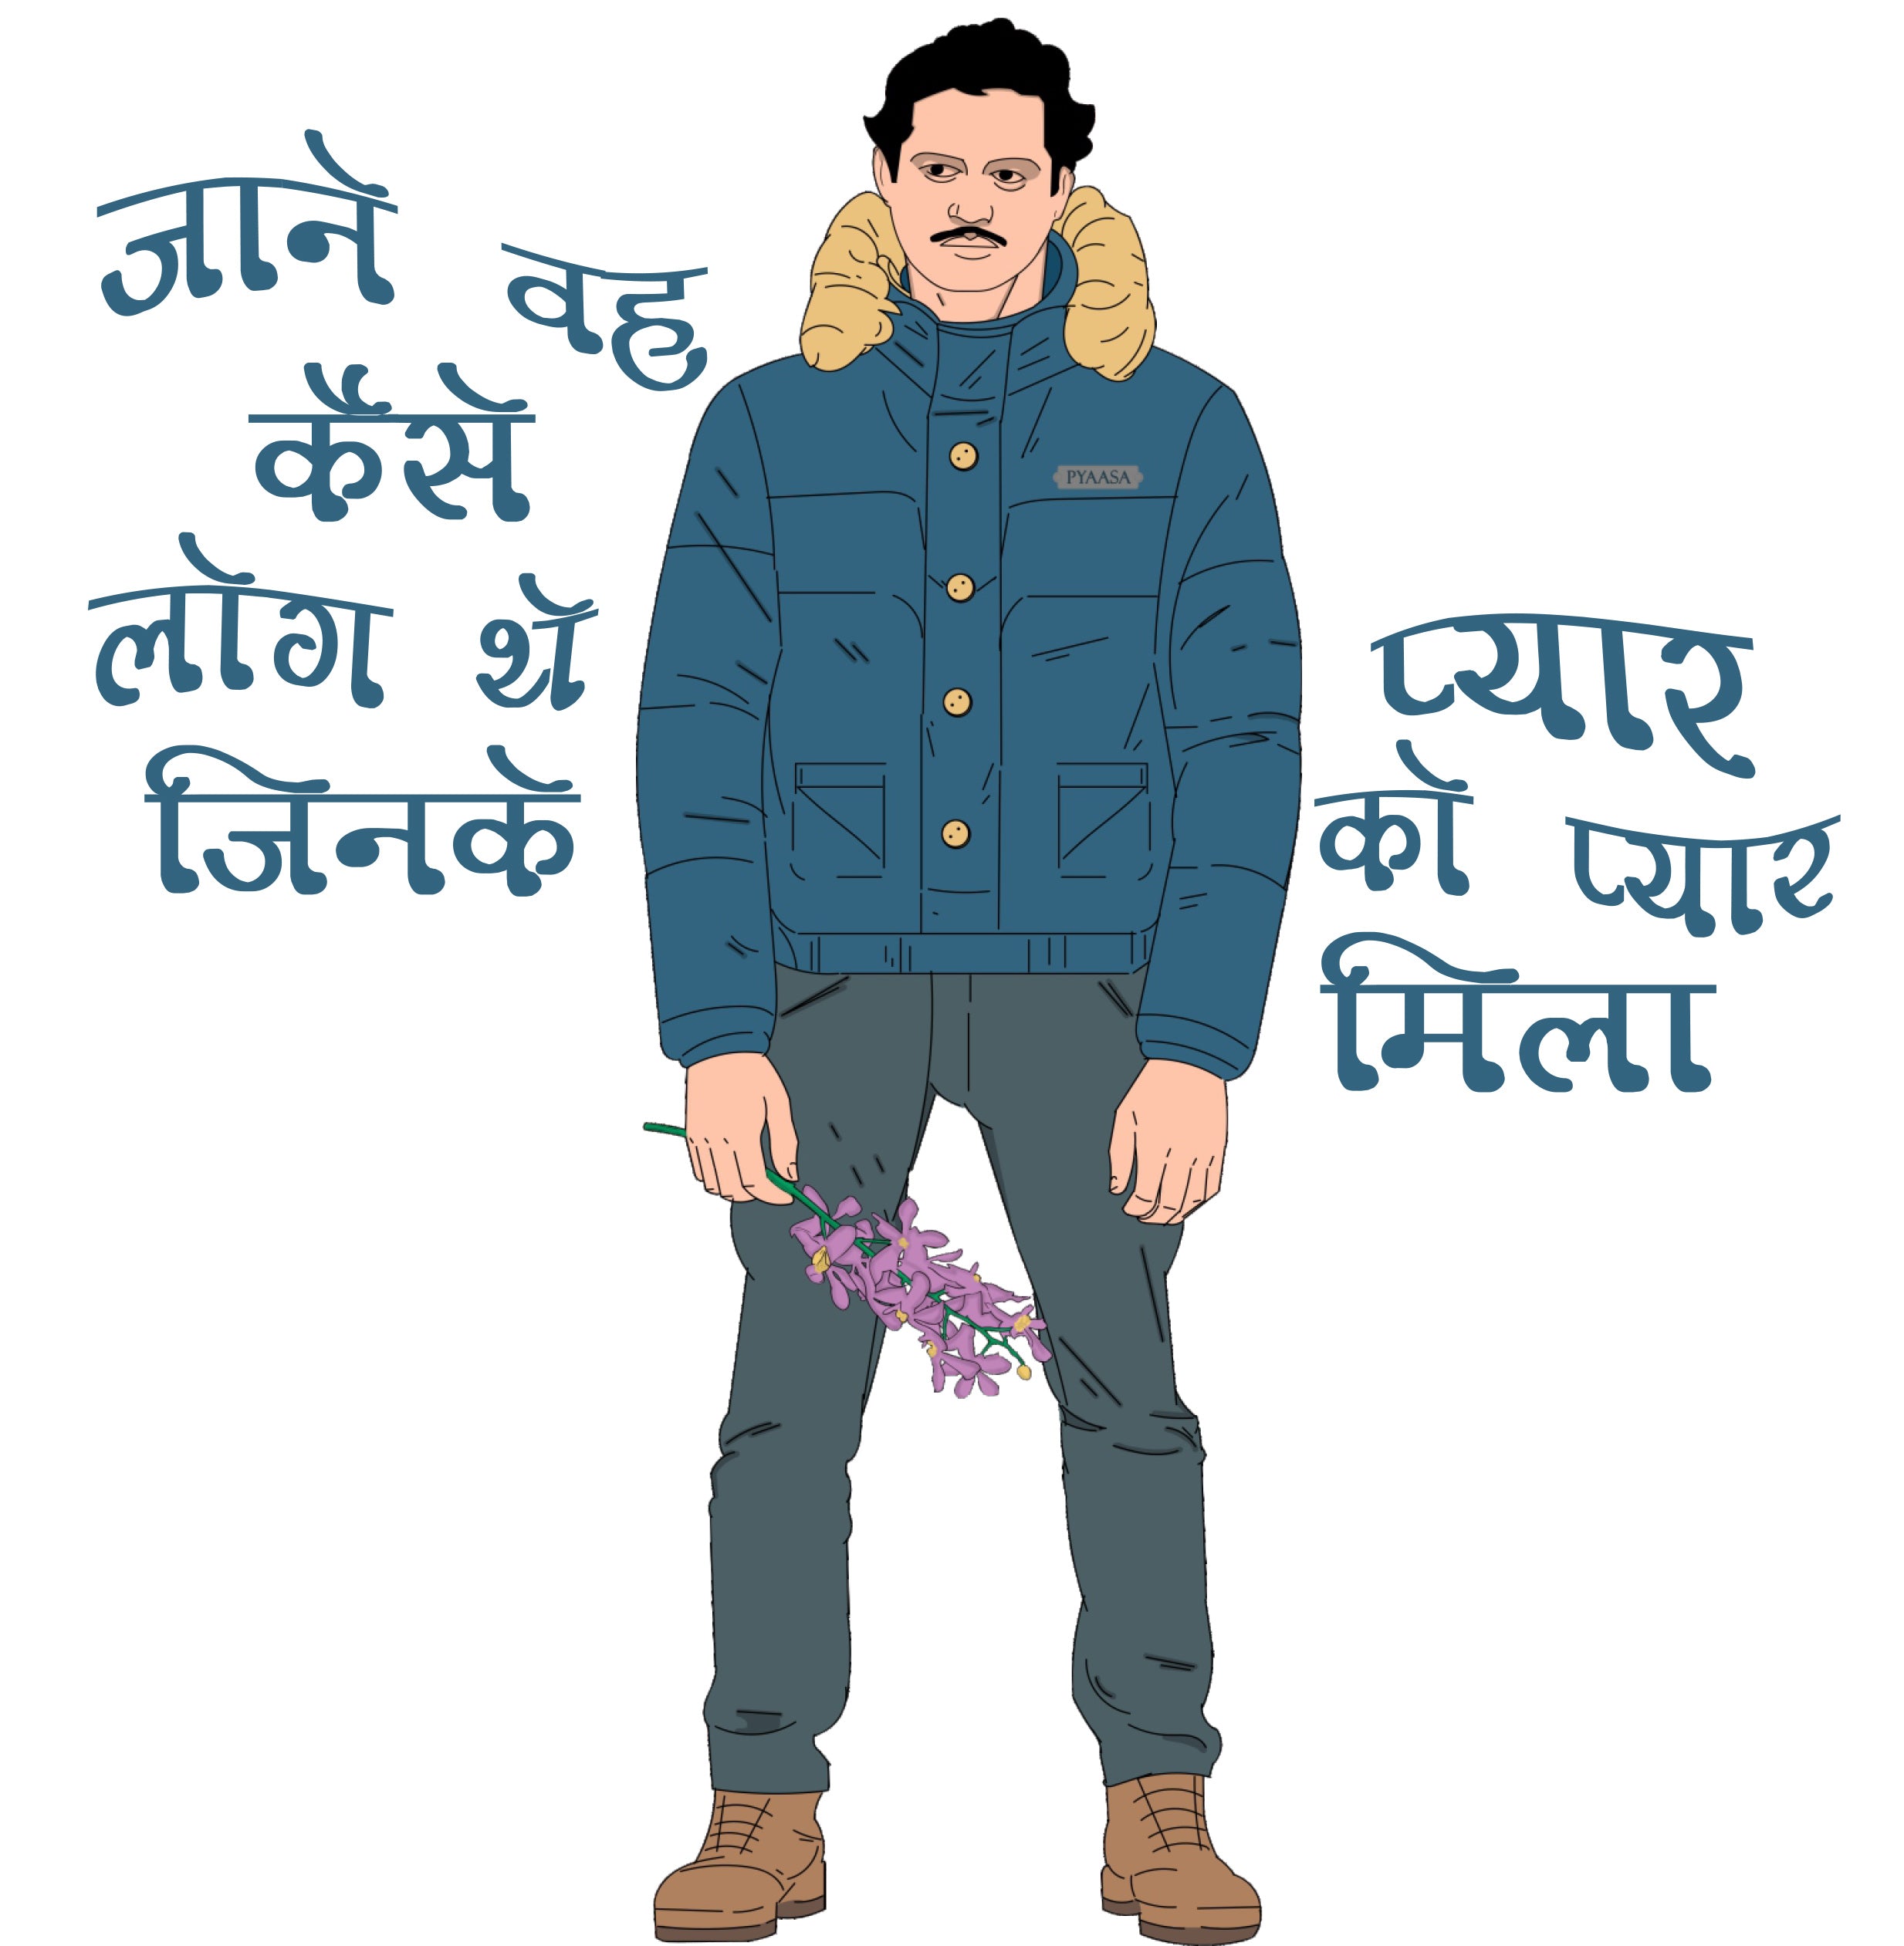 Buy Radhe FASHION HUB Tu Tera Dekh- Clothes for Bollywood Lover People -  Suitable in Every Situation - Foremost Gifting Material for Your Family,  Friends and Close Ones Red at